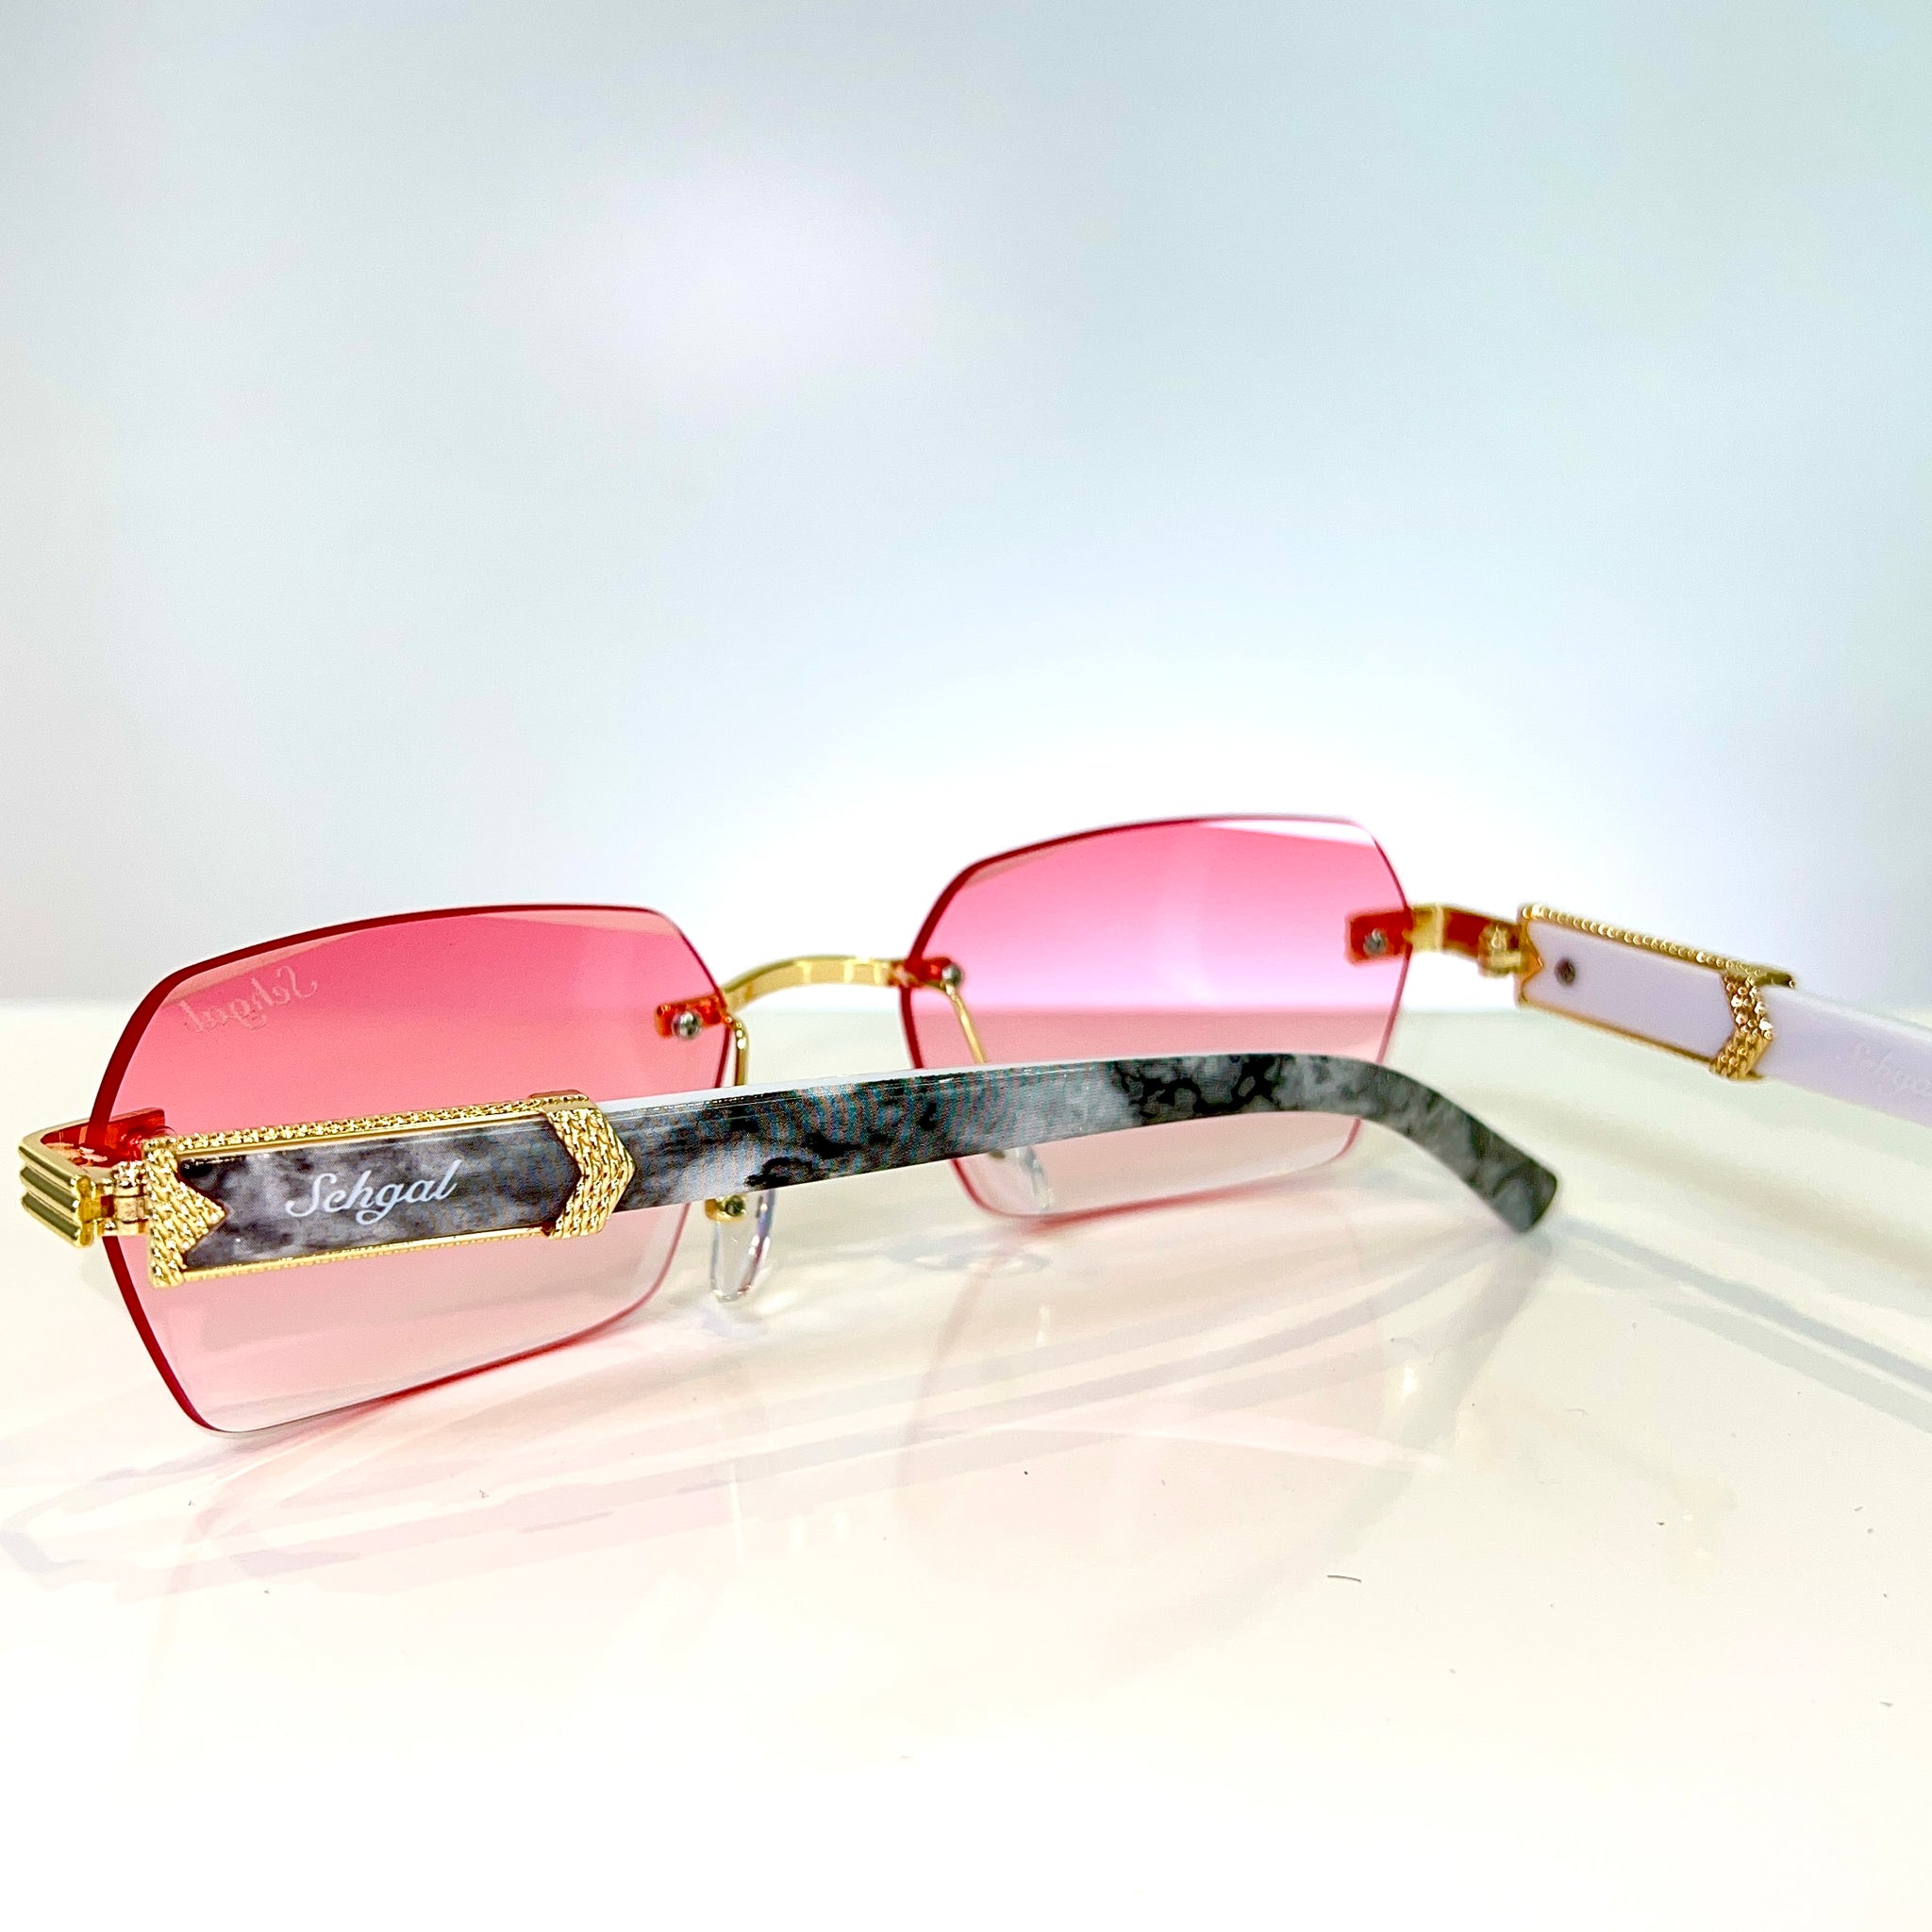 Marblecut Glasses - 14 carat gold plated -  Pink Shade